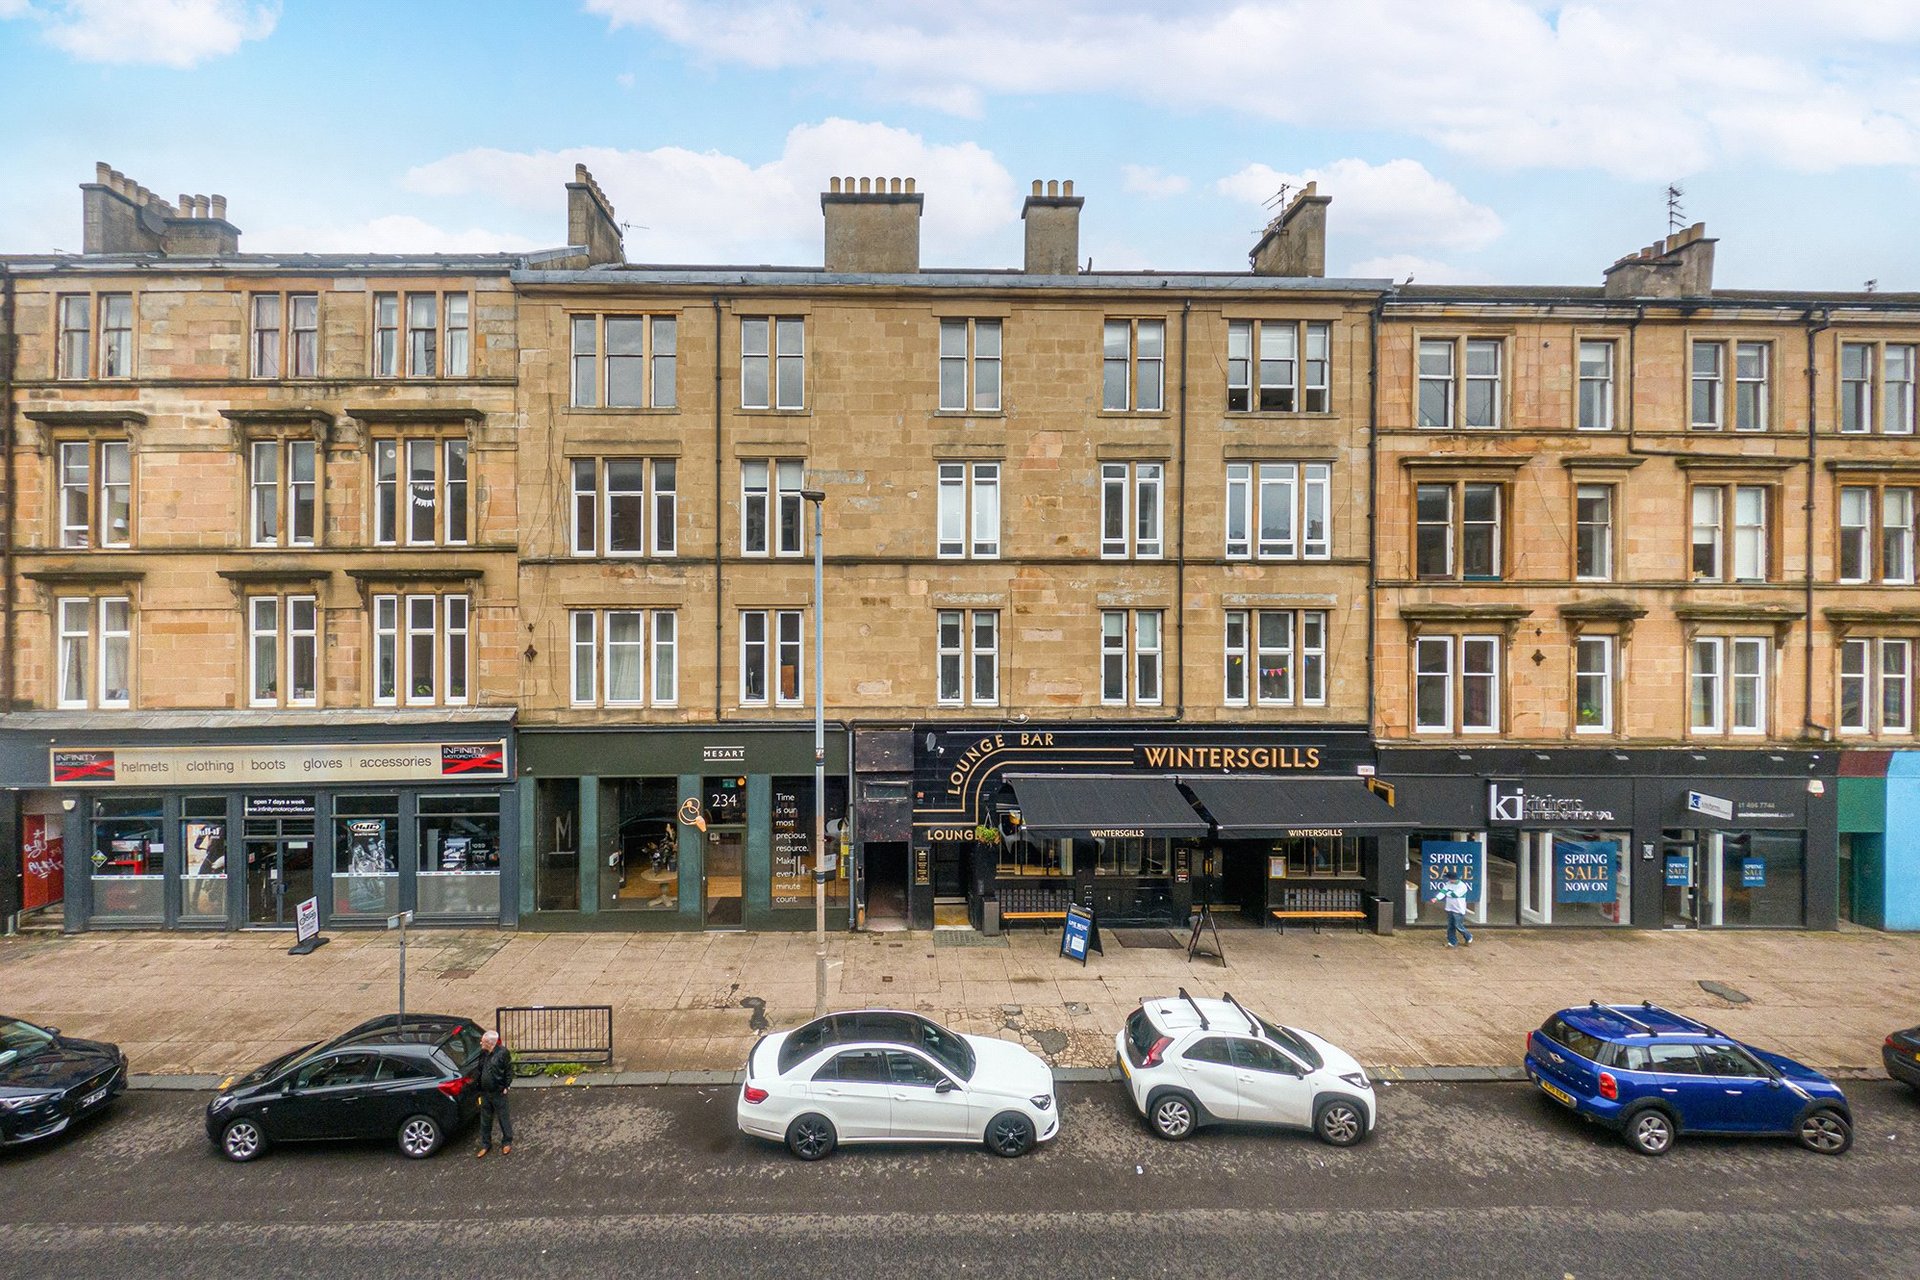 3/2, 230 Great Western Road, Woodlands, Glasgow, G4 9EJ - Picture #15